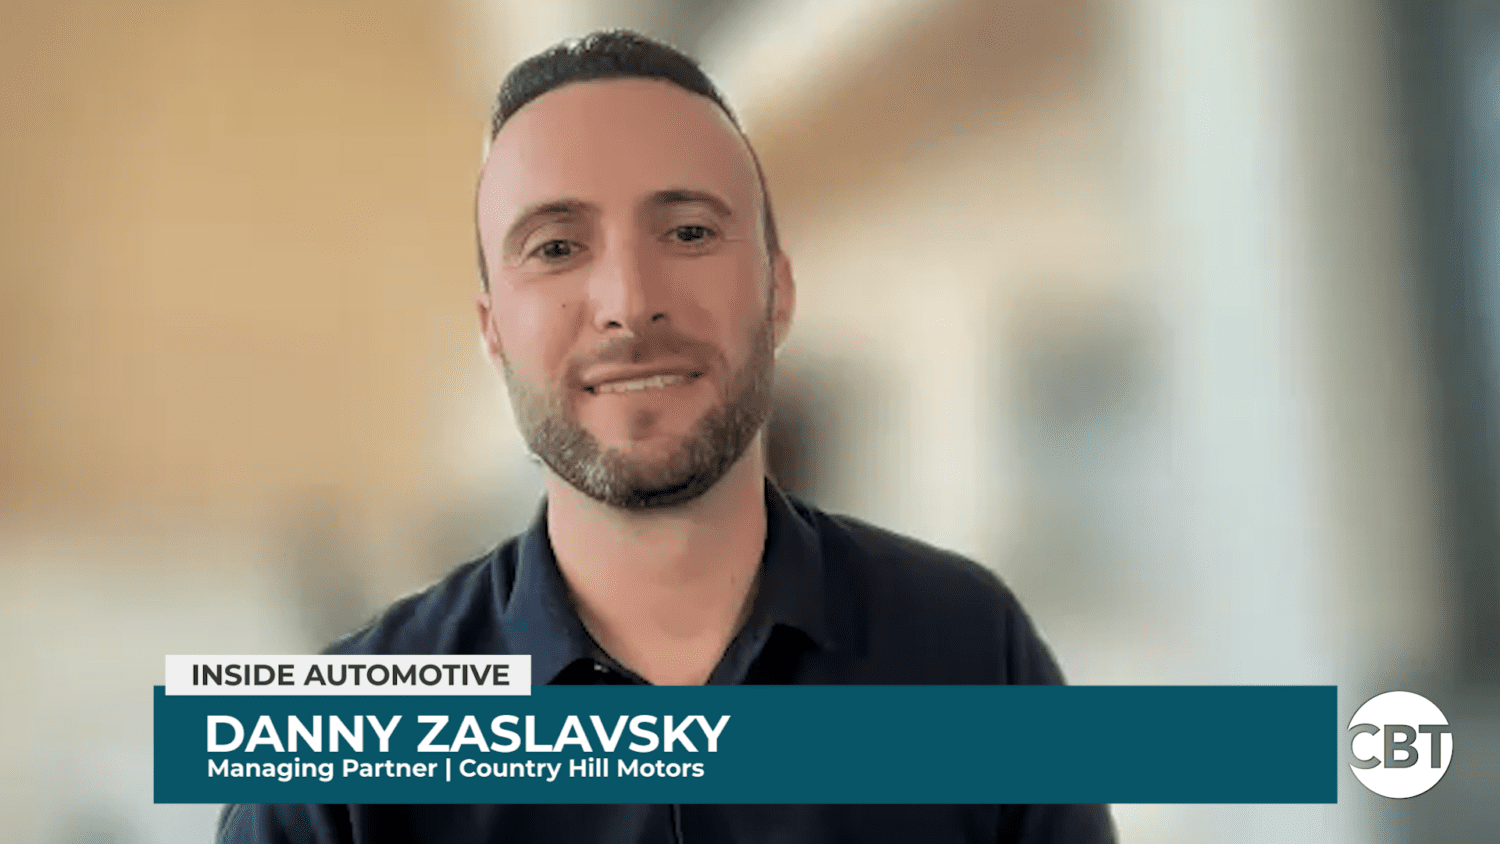 Danny Zaslavsky joins Inside Automotive to discuss the used car market and why dealers need to refine their appraisal methods.